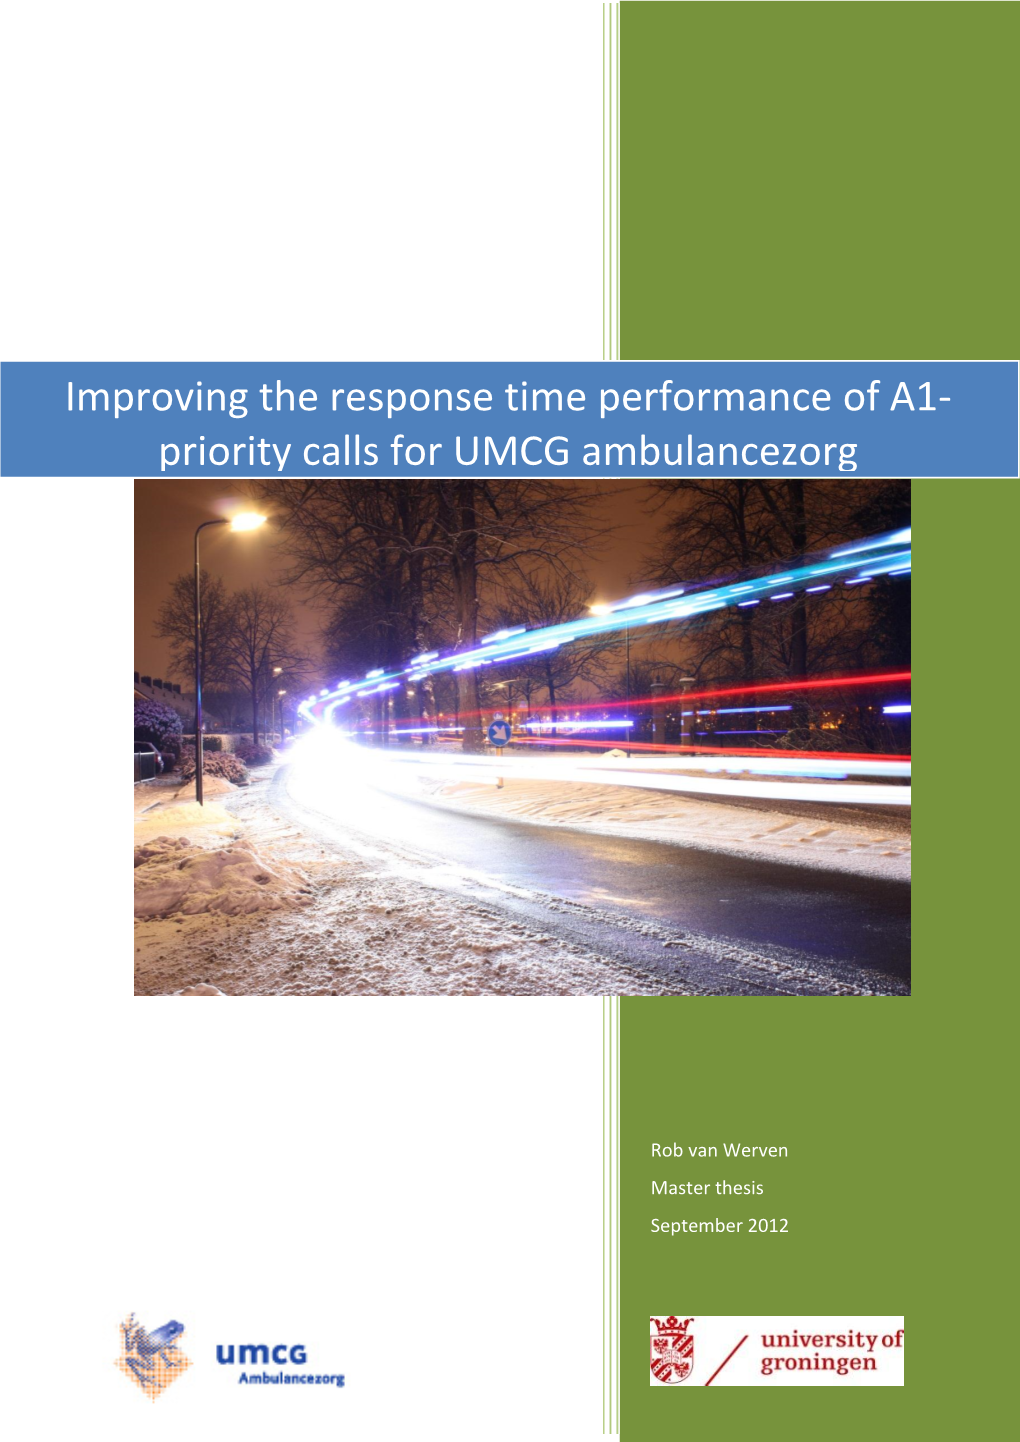 Improving the Response Time Performance of A1-Priority Calls for Umcg Ambulancezorg